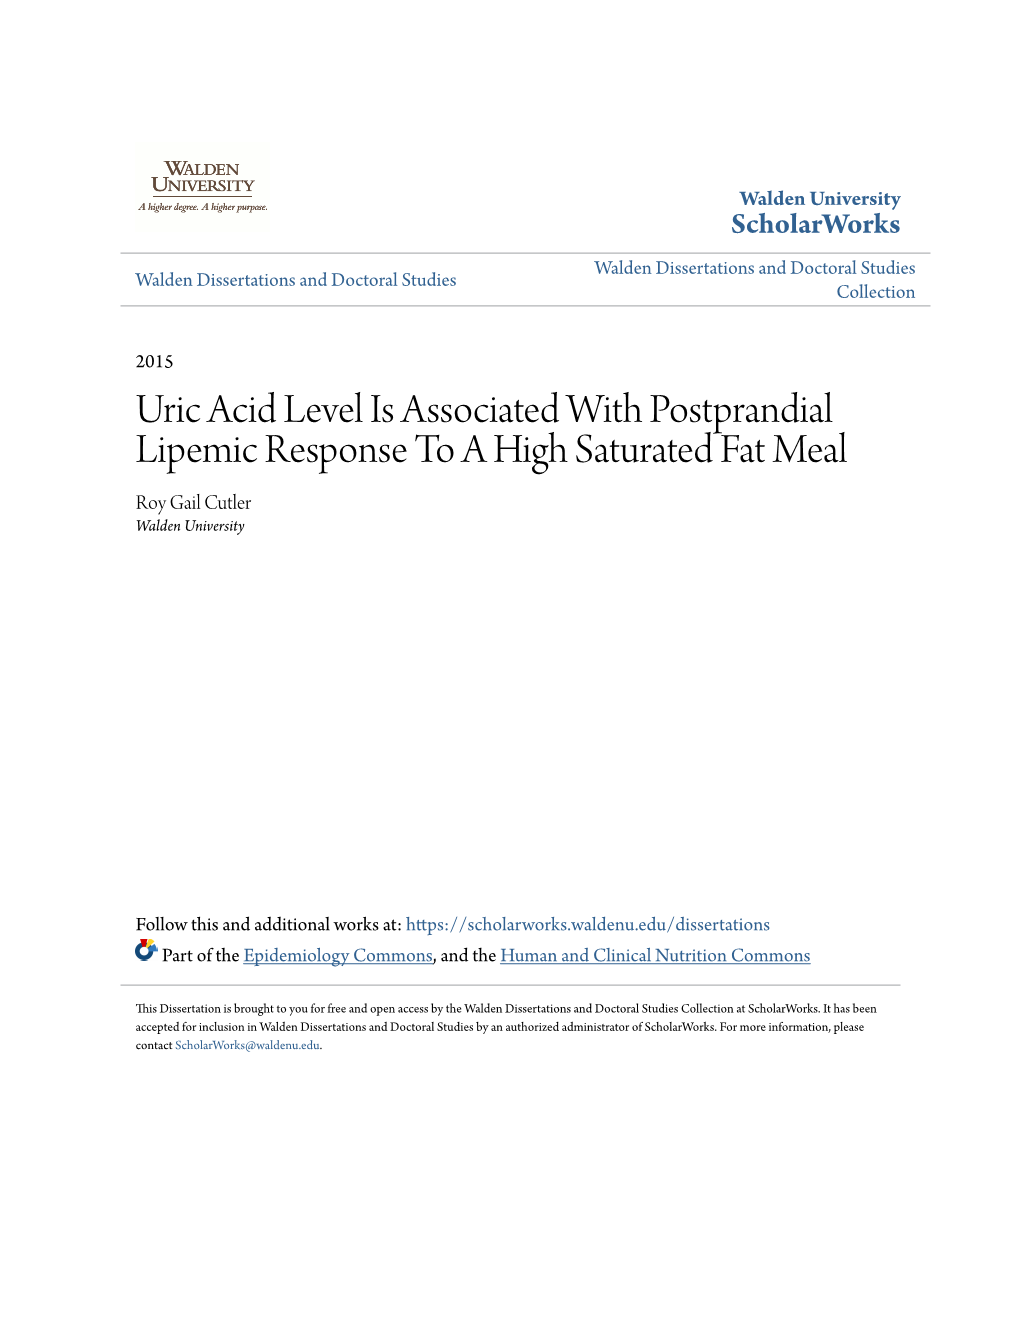 Uric Acid Level Is Associated with Postprandial Lipemic Response to a High Saturated Fat Meal Roy Gail Cutler Walden University